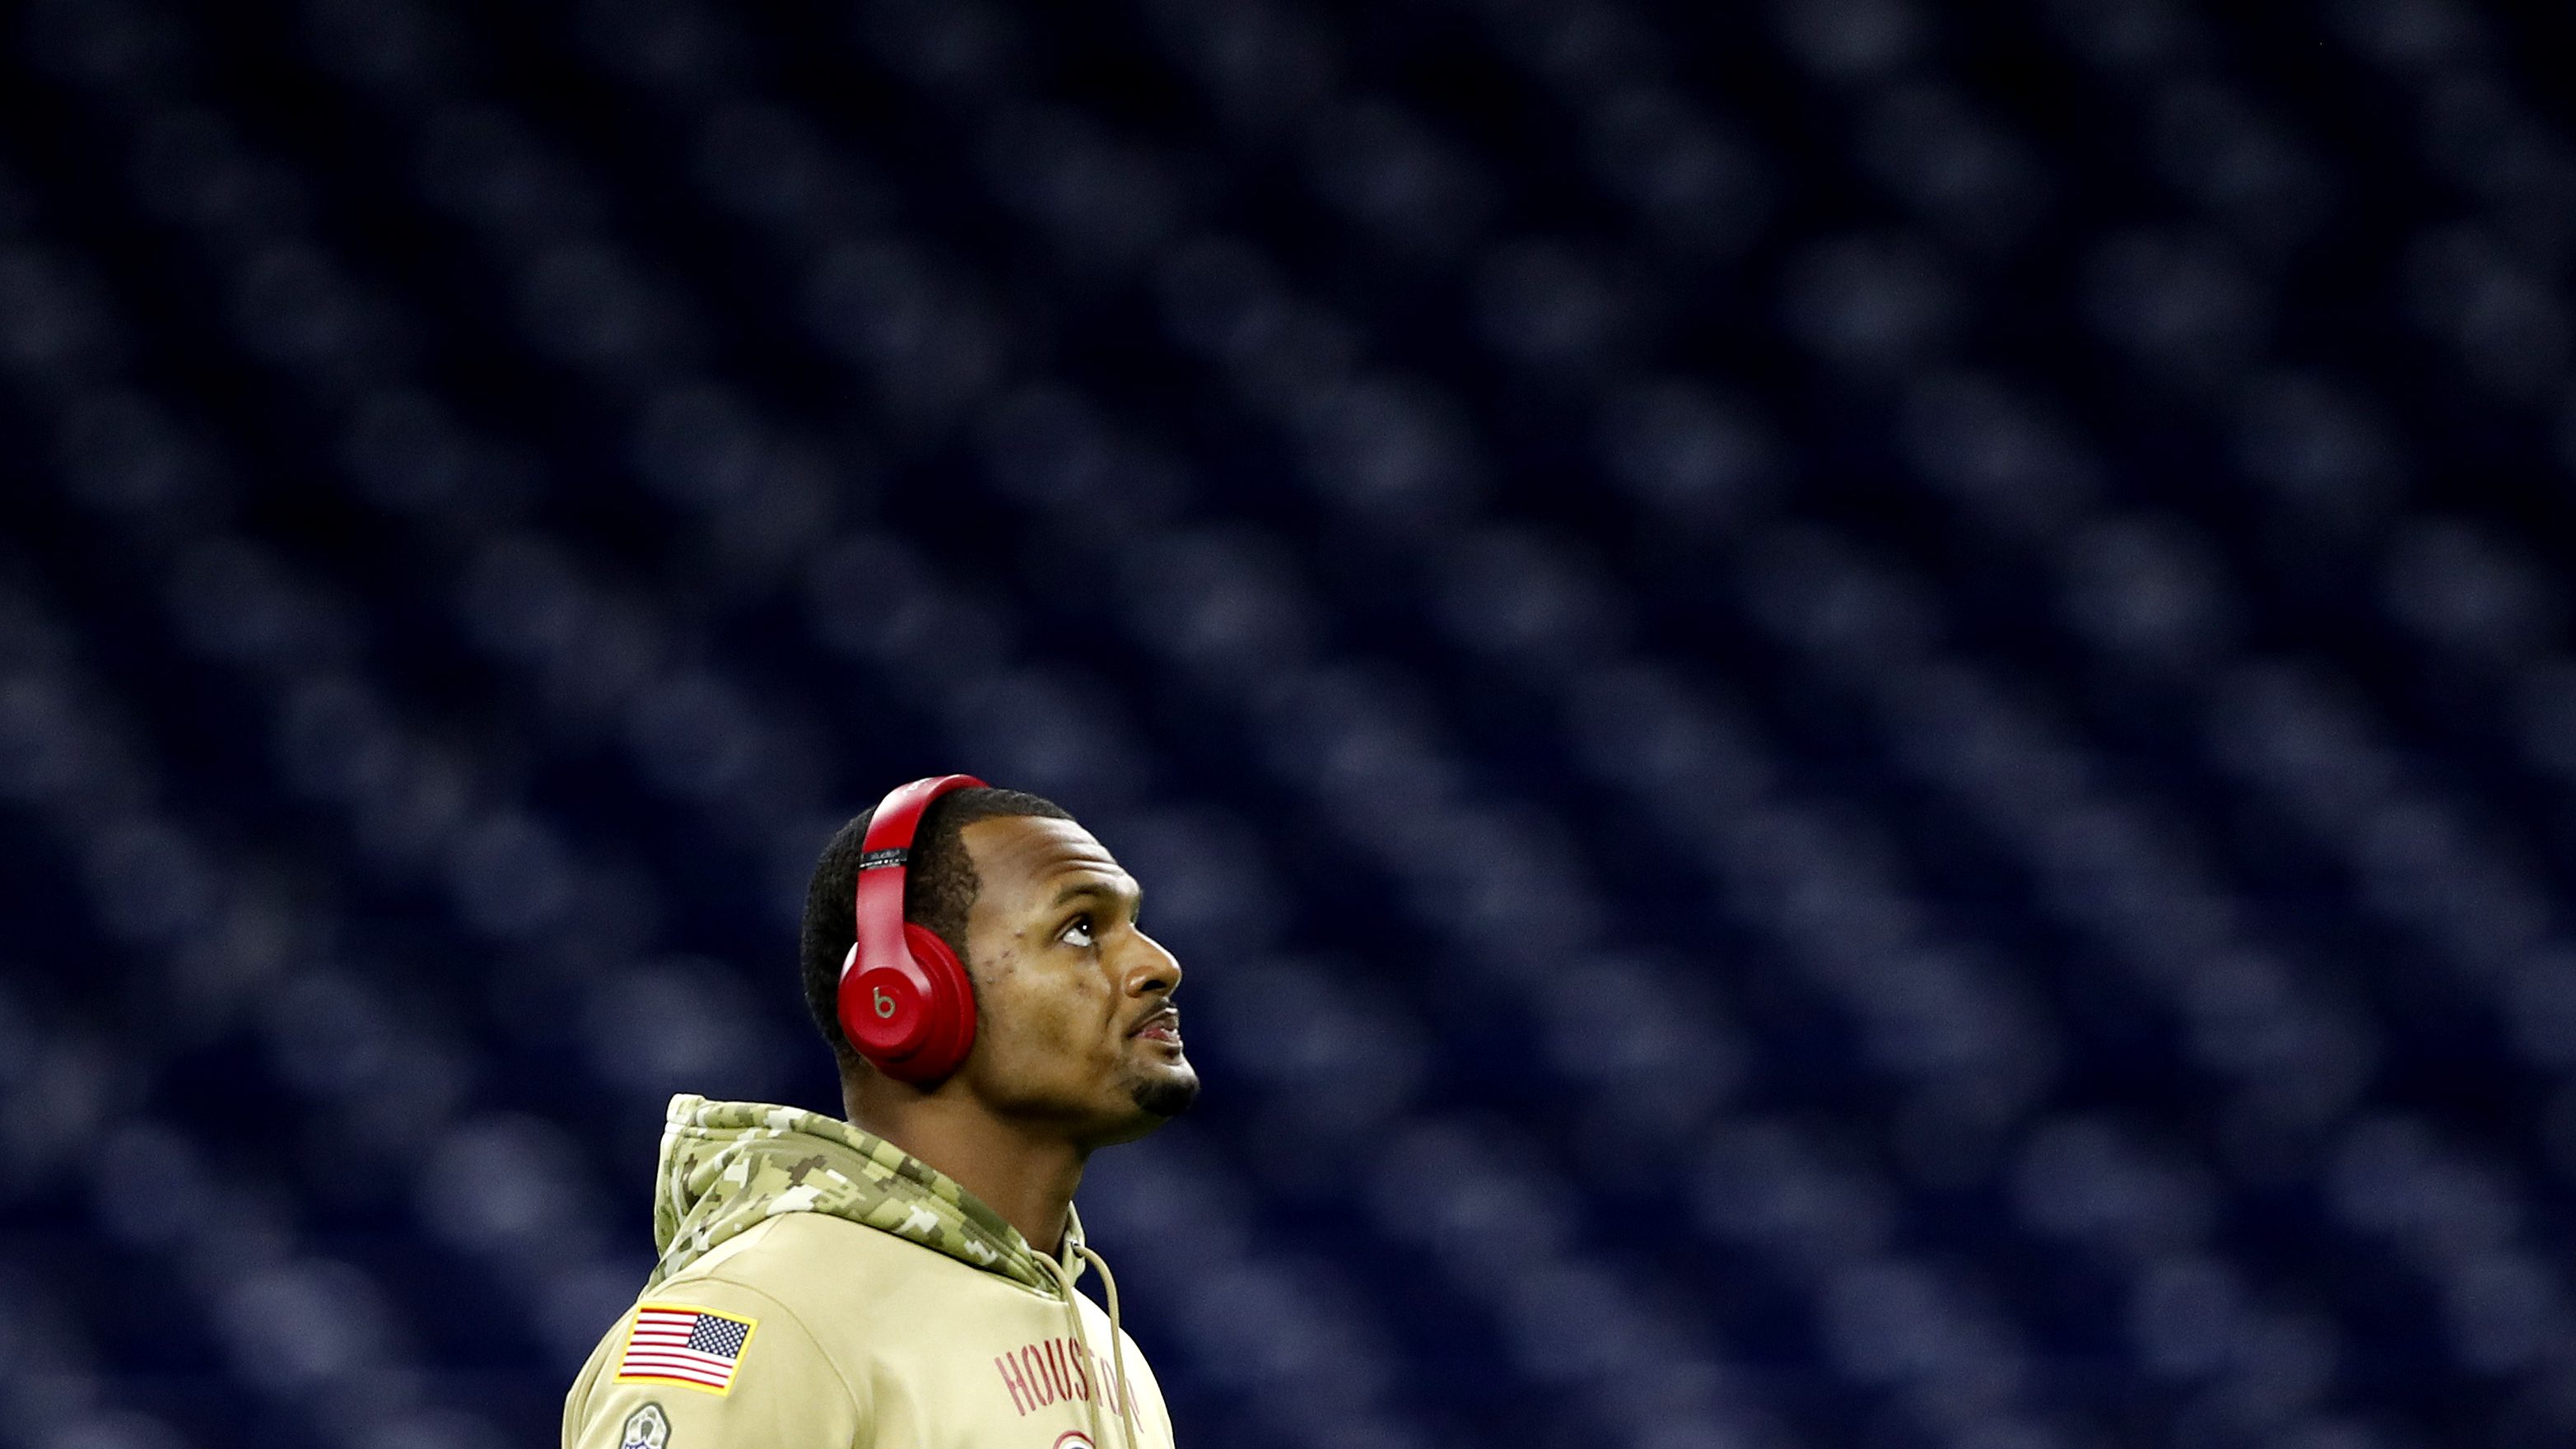 Deshaun Watson #4 of the Houston Texans warms up prior to the game against the New England Patriots at NRG Stadium on December 01, 2019 in Houston, Texas. He is in a green camo hoodie and wearing red headphone.